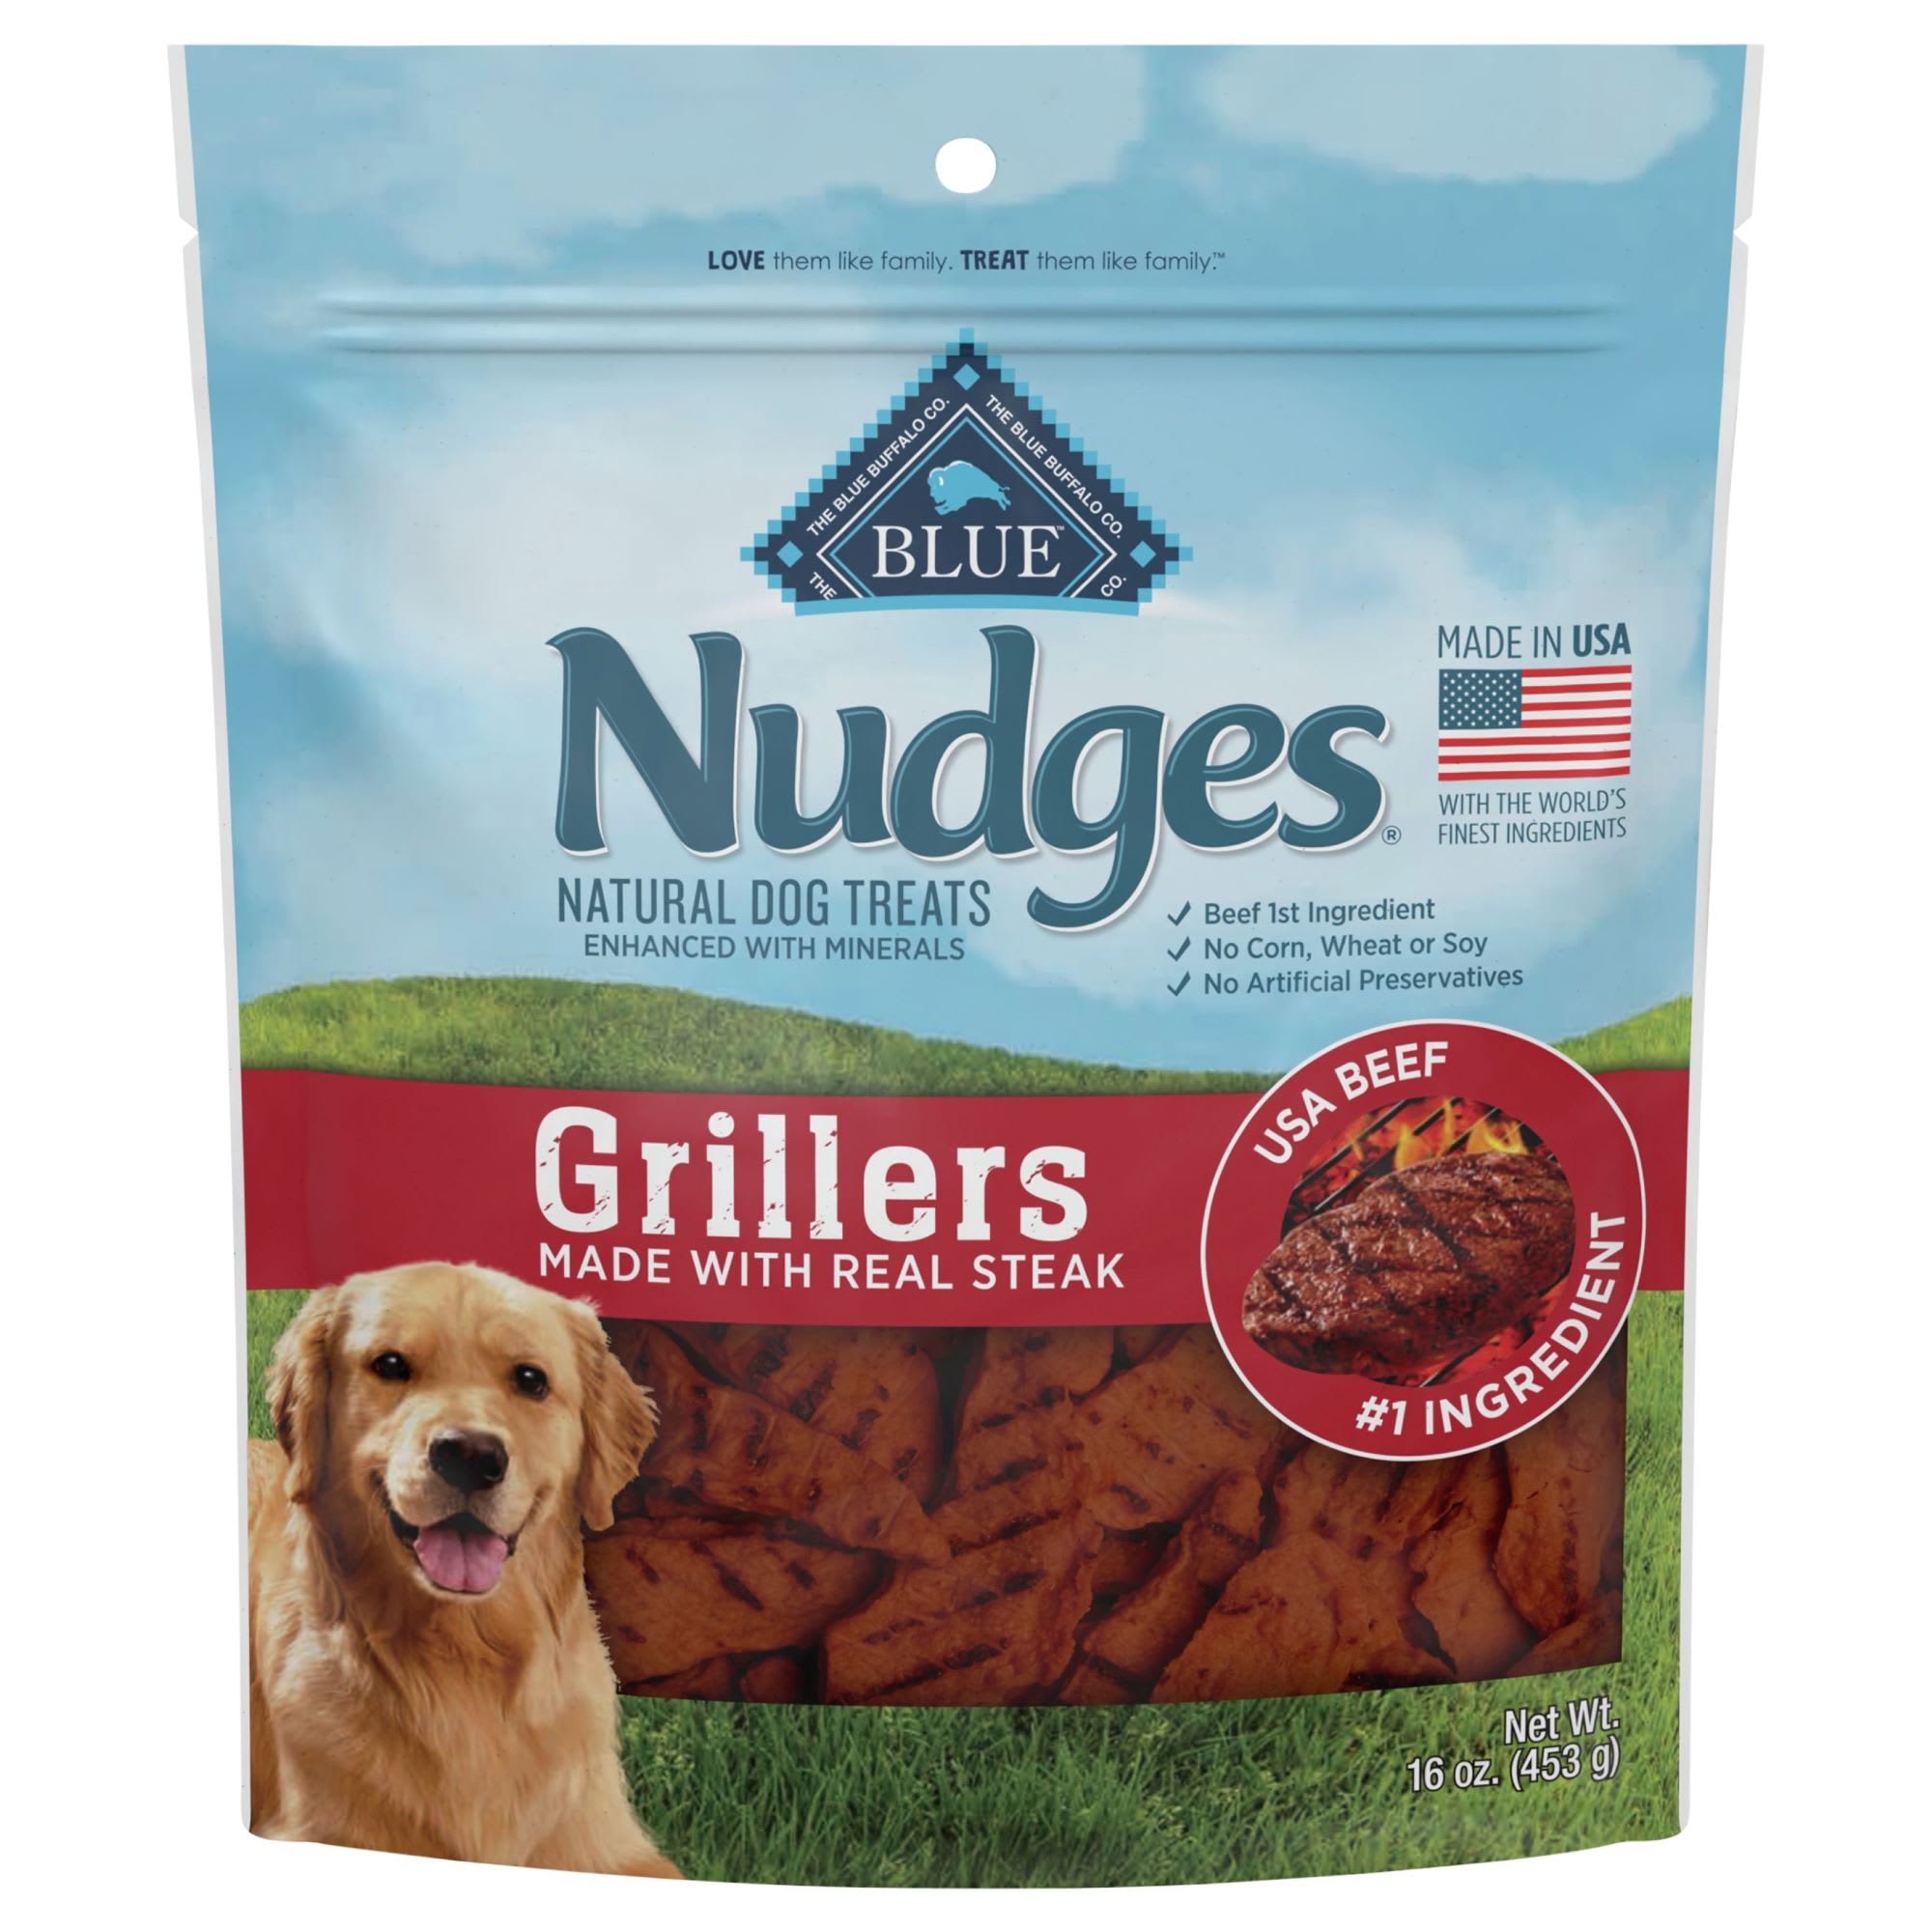 Photos - Dog Food Blue Buffalo Nudges Grillers Made with Real Steak Natural Dog 